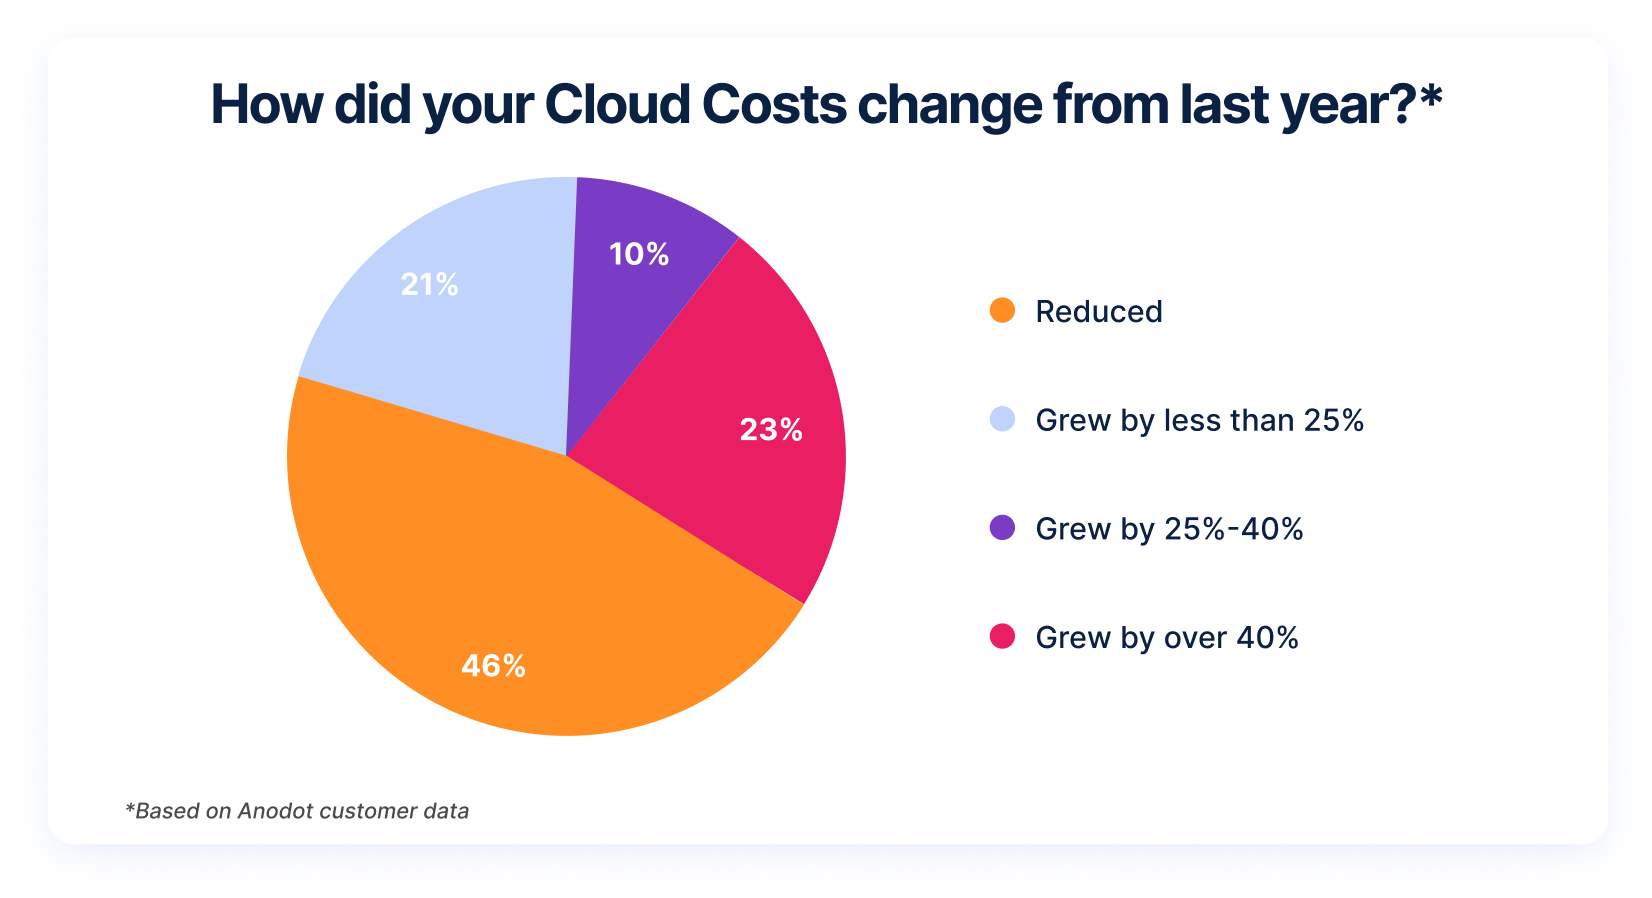 A pie chart showing how Anodot clients' cloud cost spend changed yearly